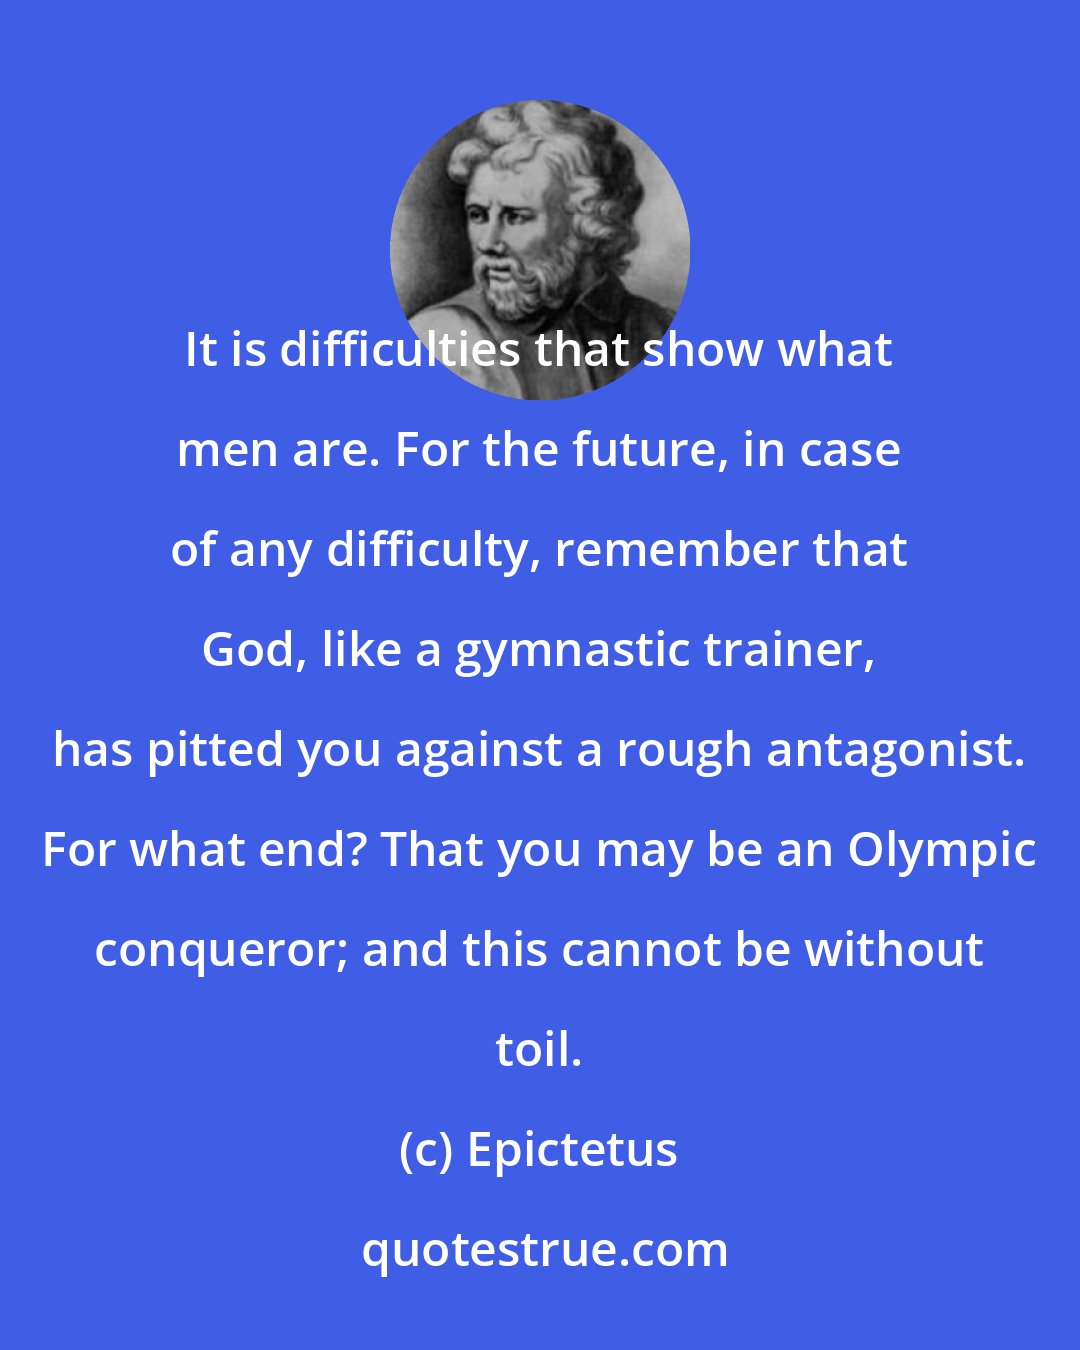 Epictetus: It is difficulties that show what men are. For the future, in case of any difficulty, remember that God, like a gymnastic trainer, has pitted you against a rough antagonist. For what end? That you may be an Olympic conqueror; and this cannot be without toil.